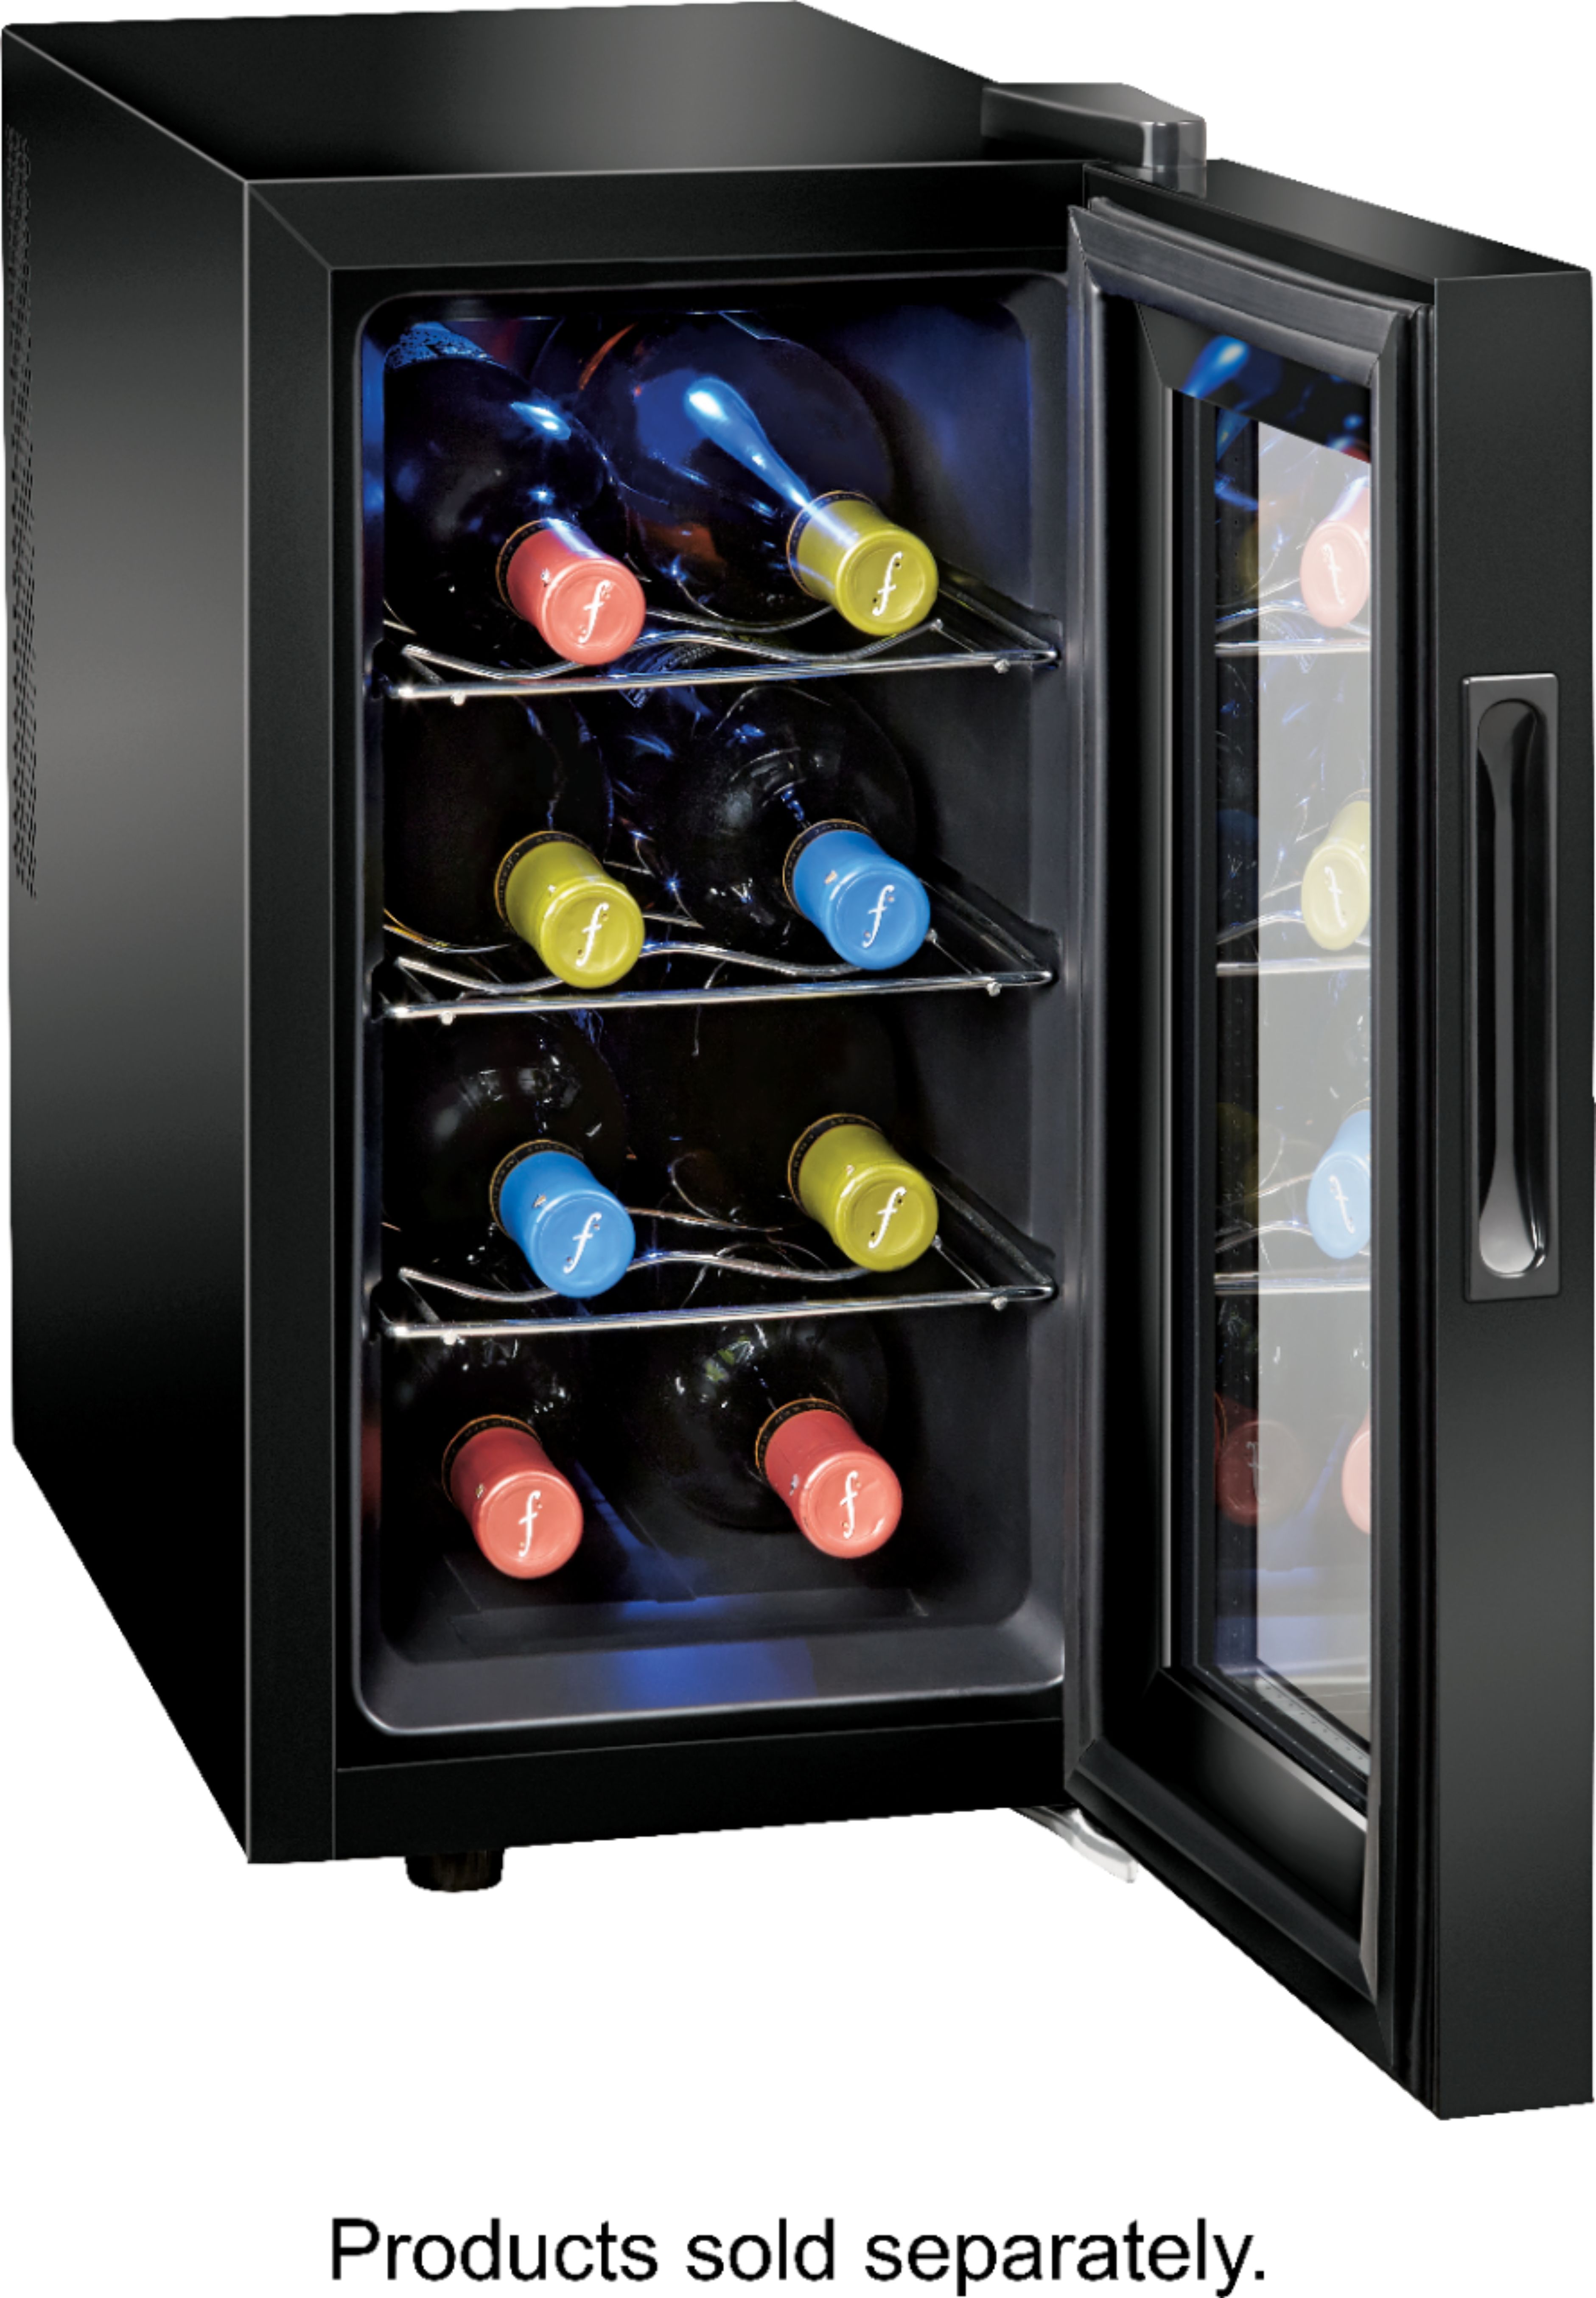 47+ Insignia 8 bottle wine cooler reviews ideas